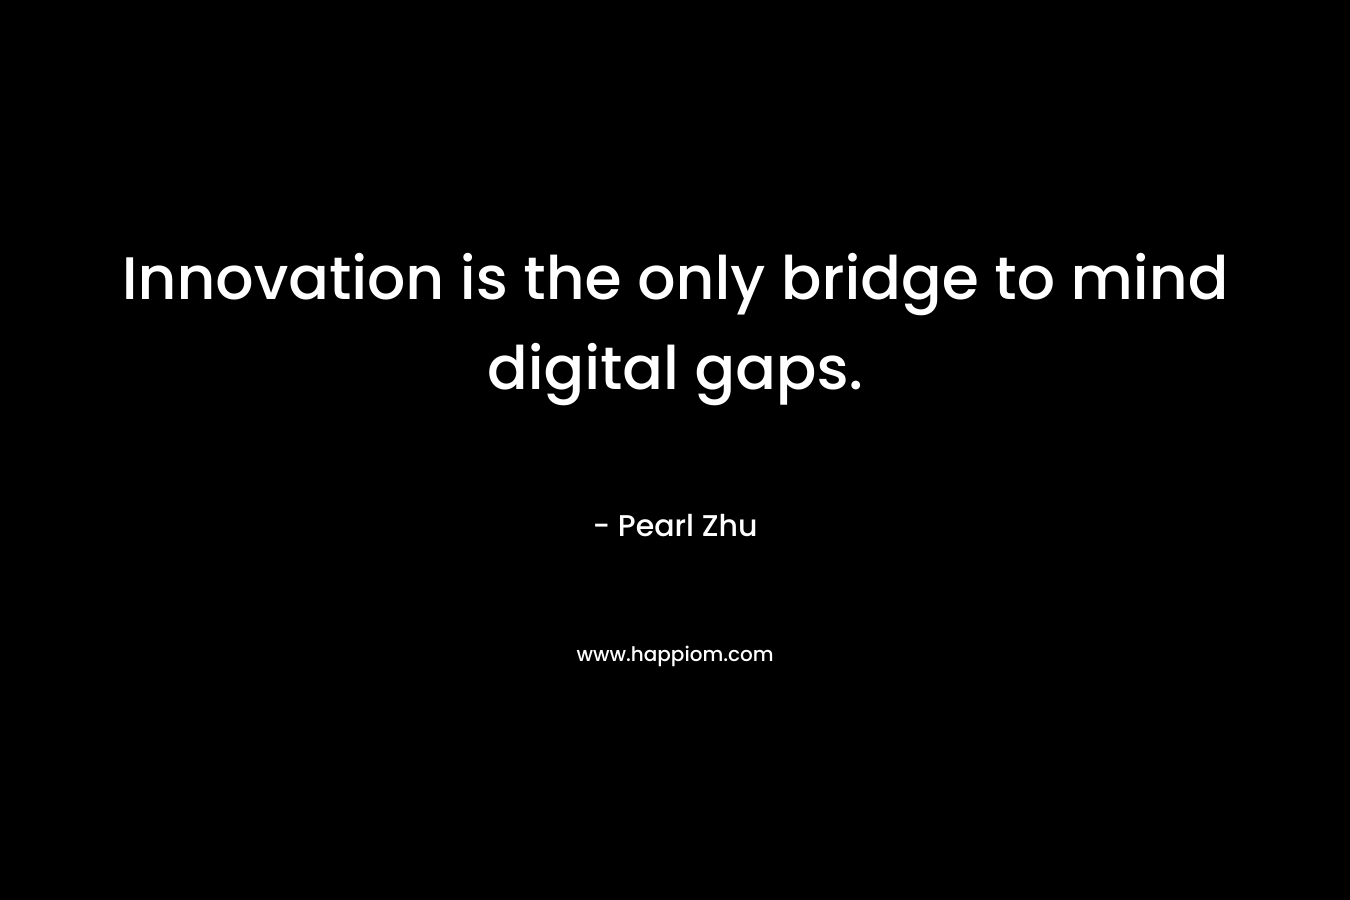 Innovation is the only bridge to mind digital gaps.